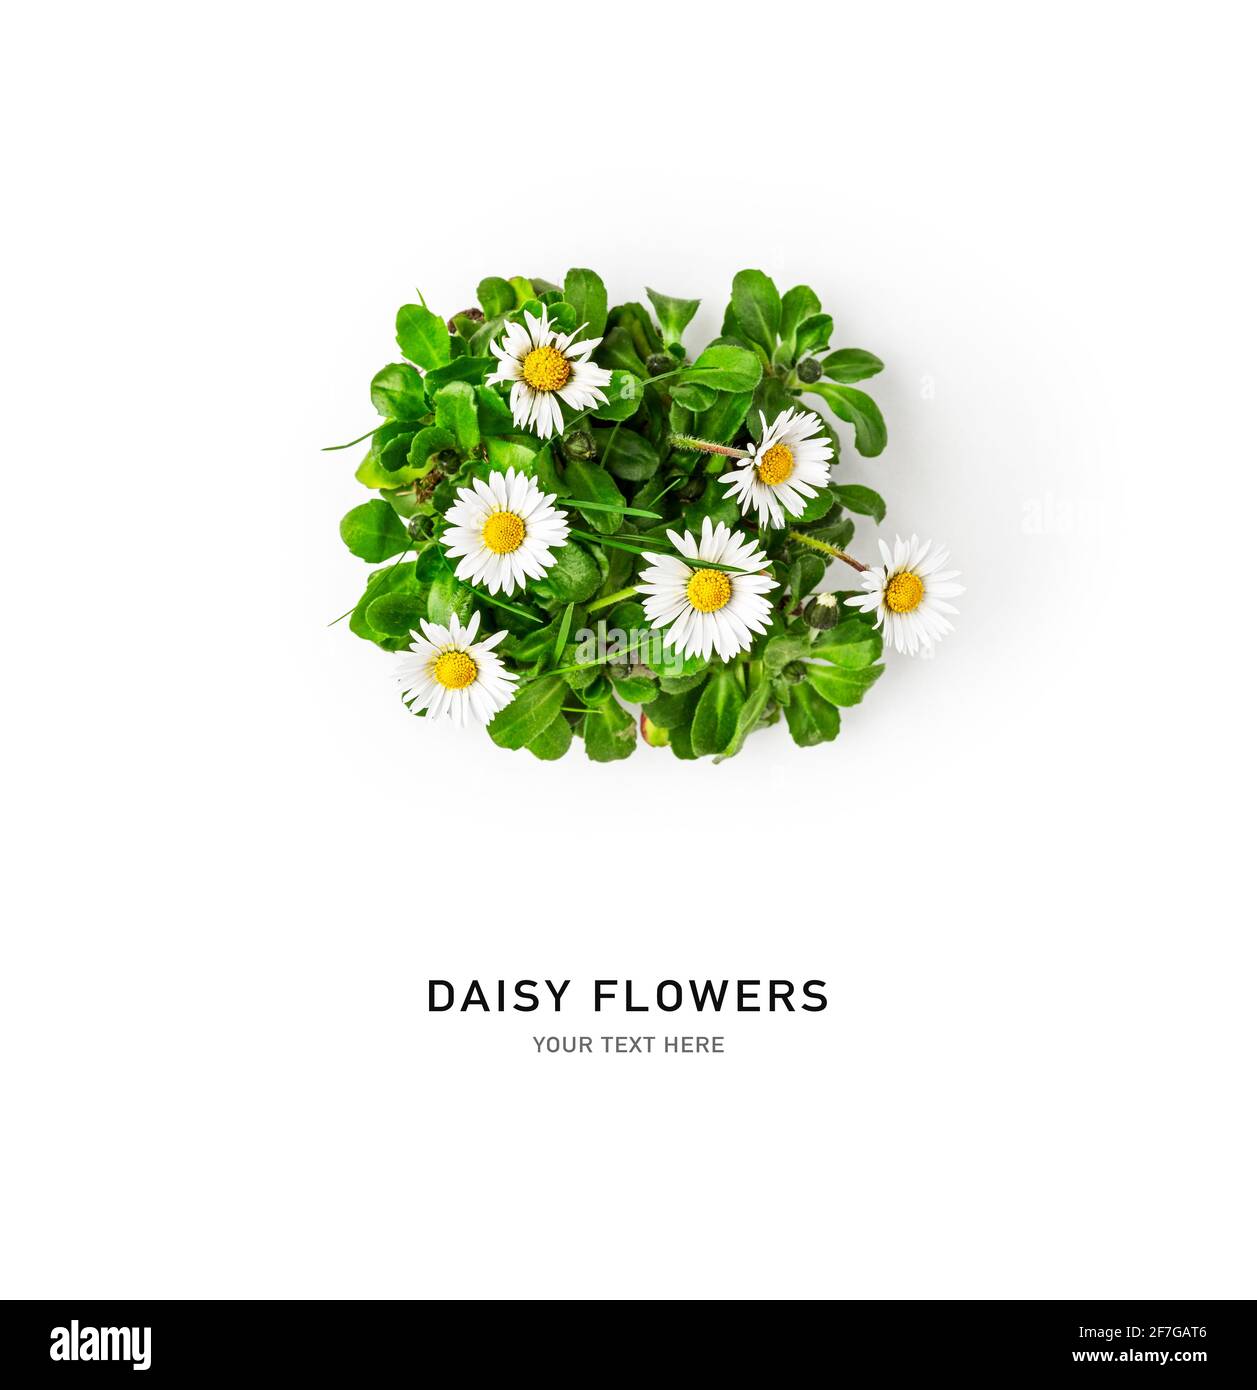 Daisy flower creative composition. White bellis perennis flowers with leaves isolated on white background. Floral arrangement, design element. Springt Stock Photo